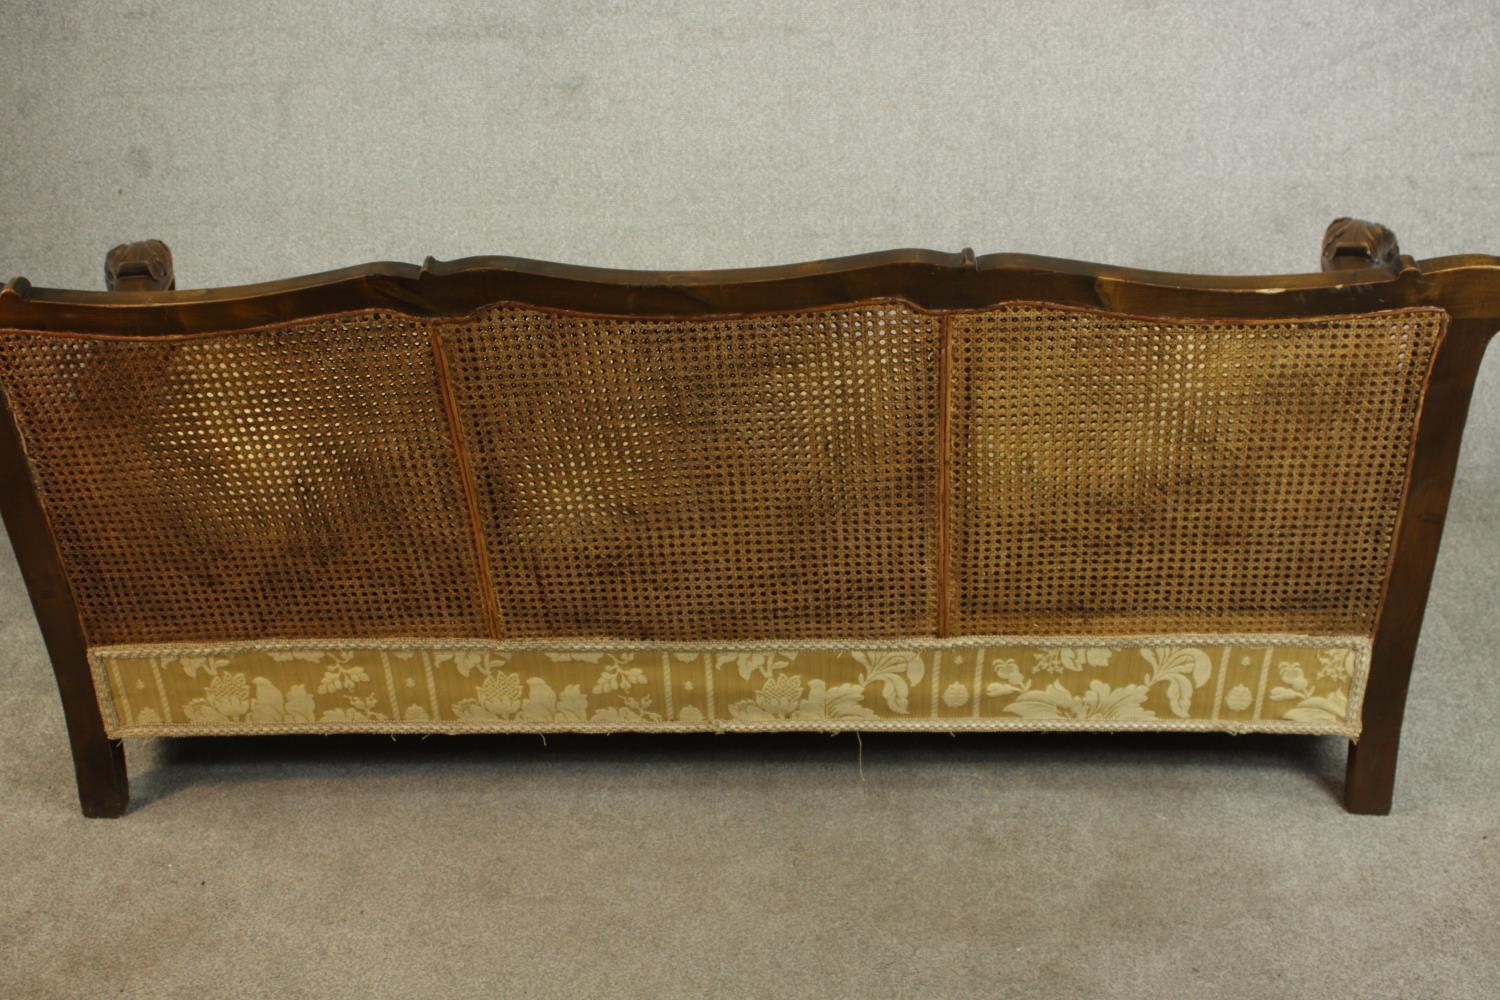 An early 20th century Continental carved walnut three seater bergere sofa, upholstered in gold - Image 15 of 18